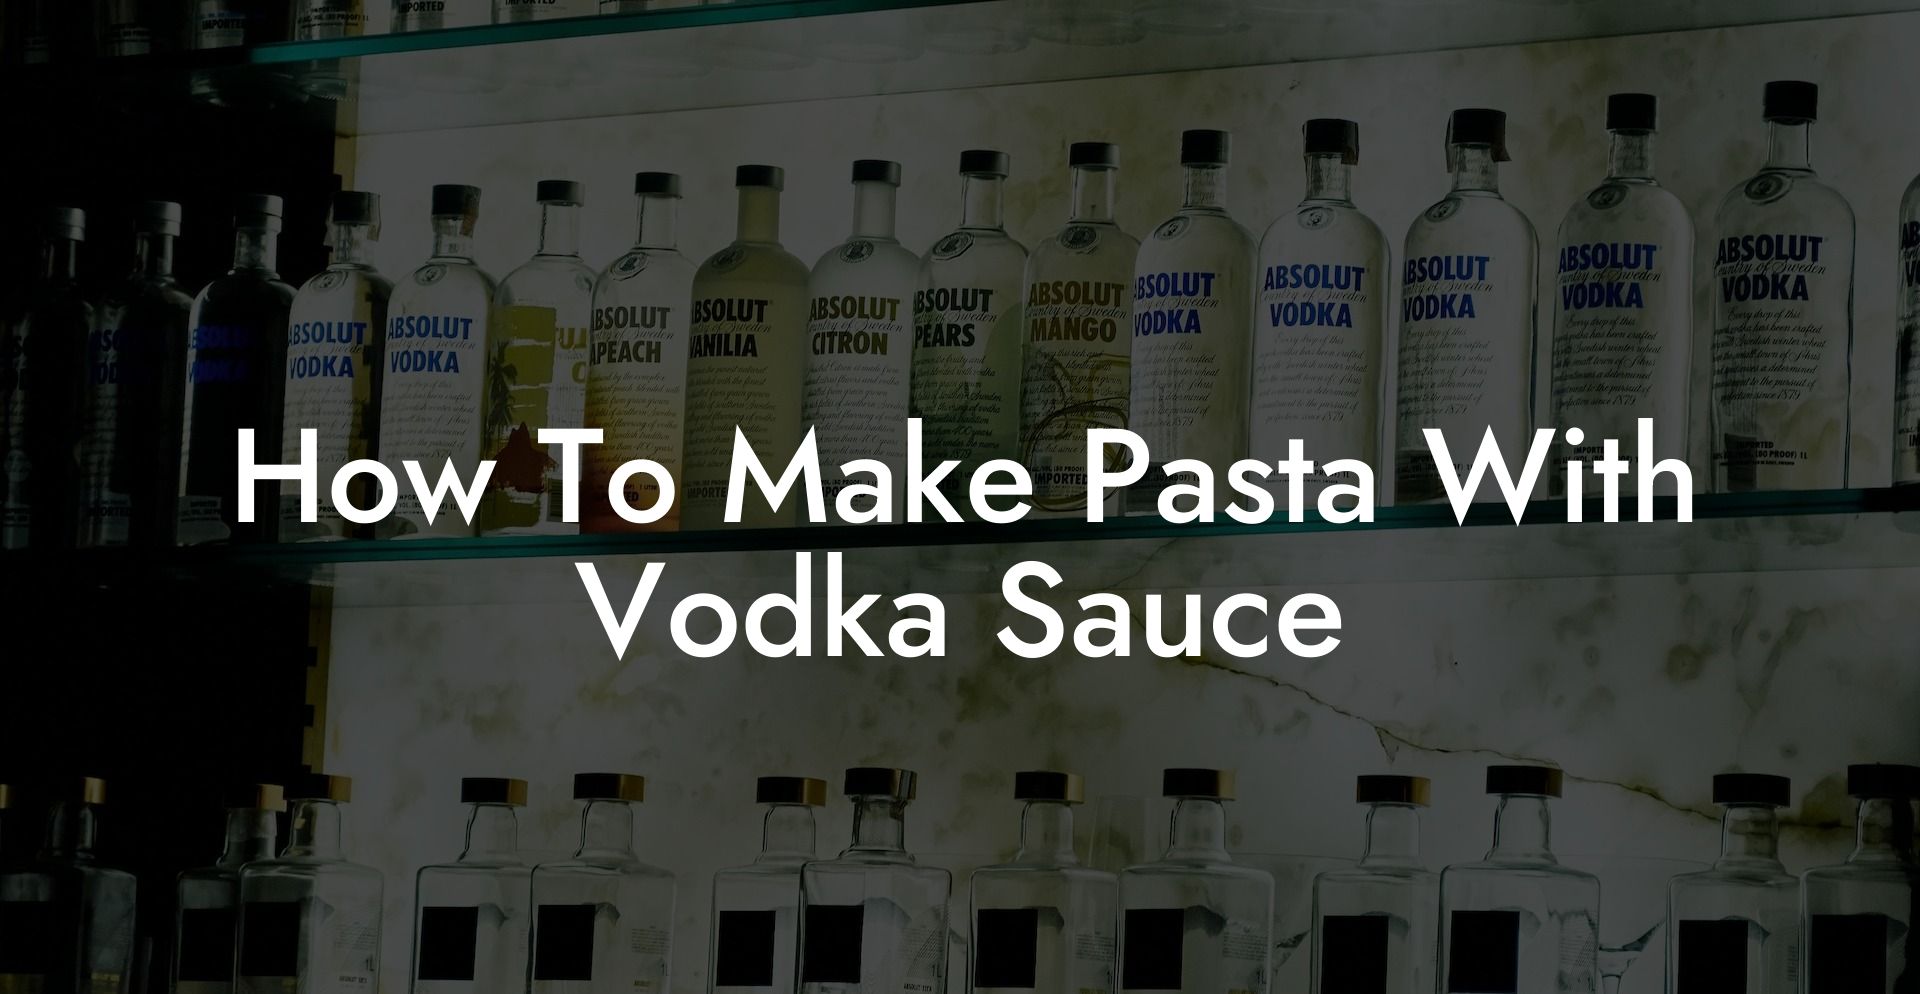 How To Make Pasta With Vodka Sauce